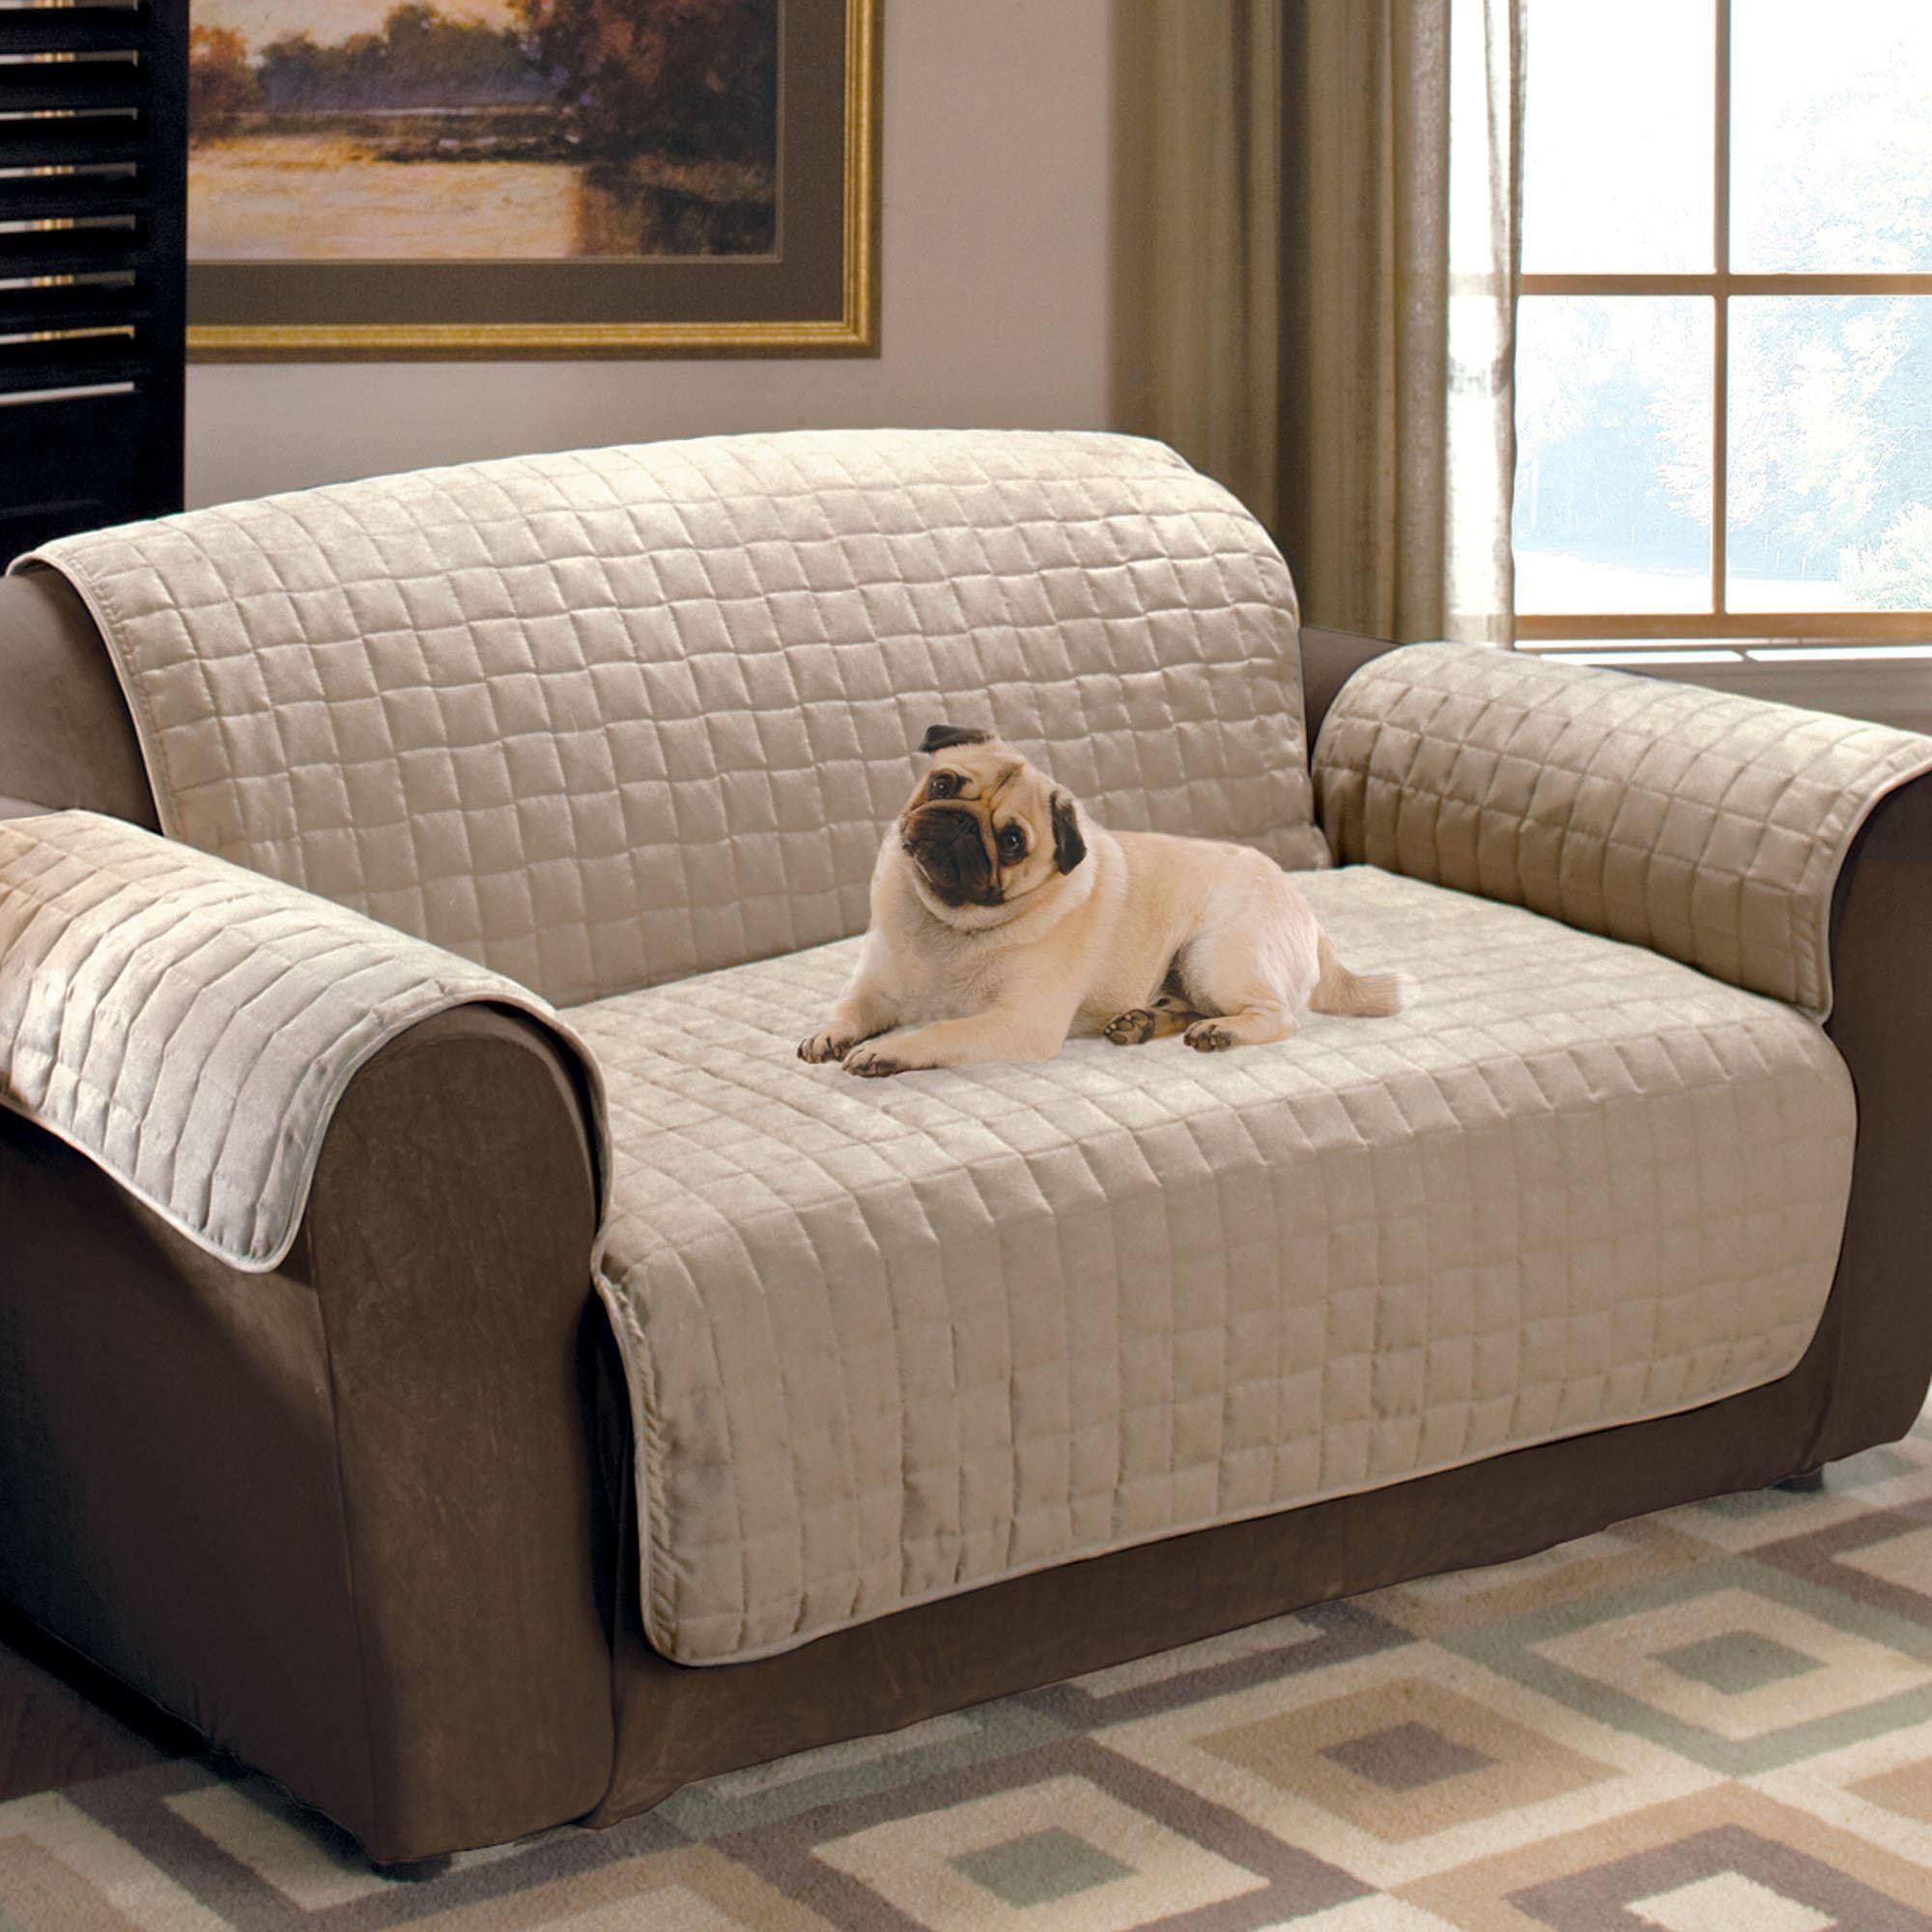 Faux Suede Pet Furniture Covers For Sofas, Loveseats, And Chairs Inside Covers For Sofas And Chairs (View 1 of 20)